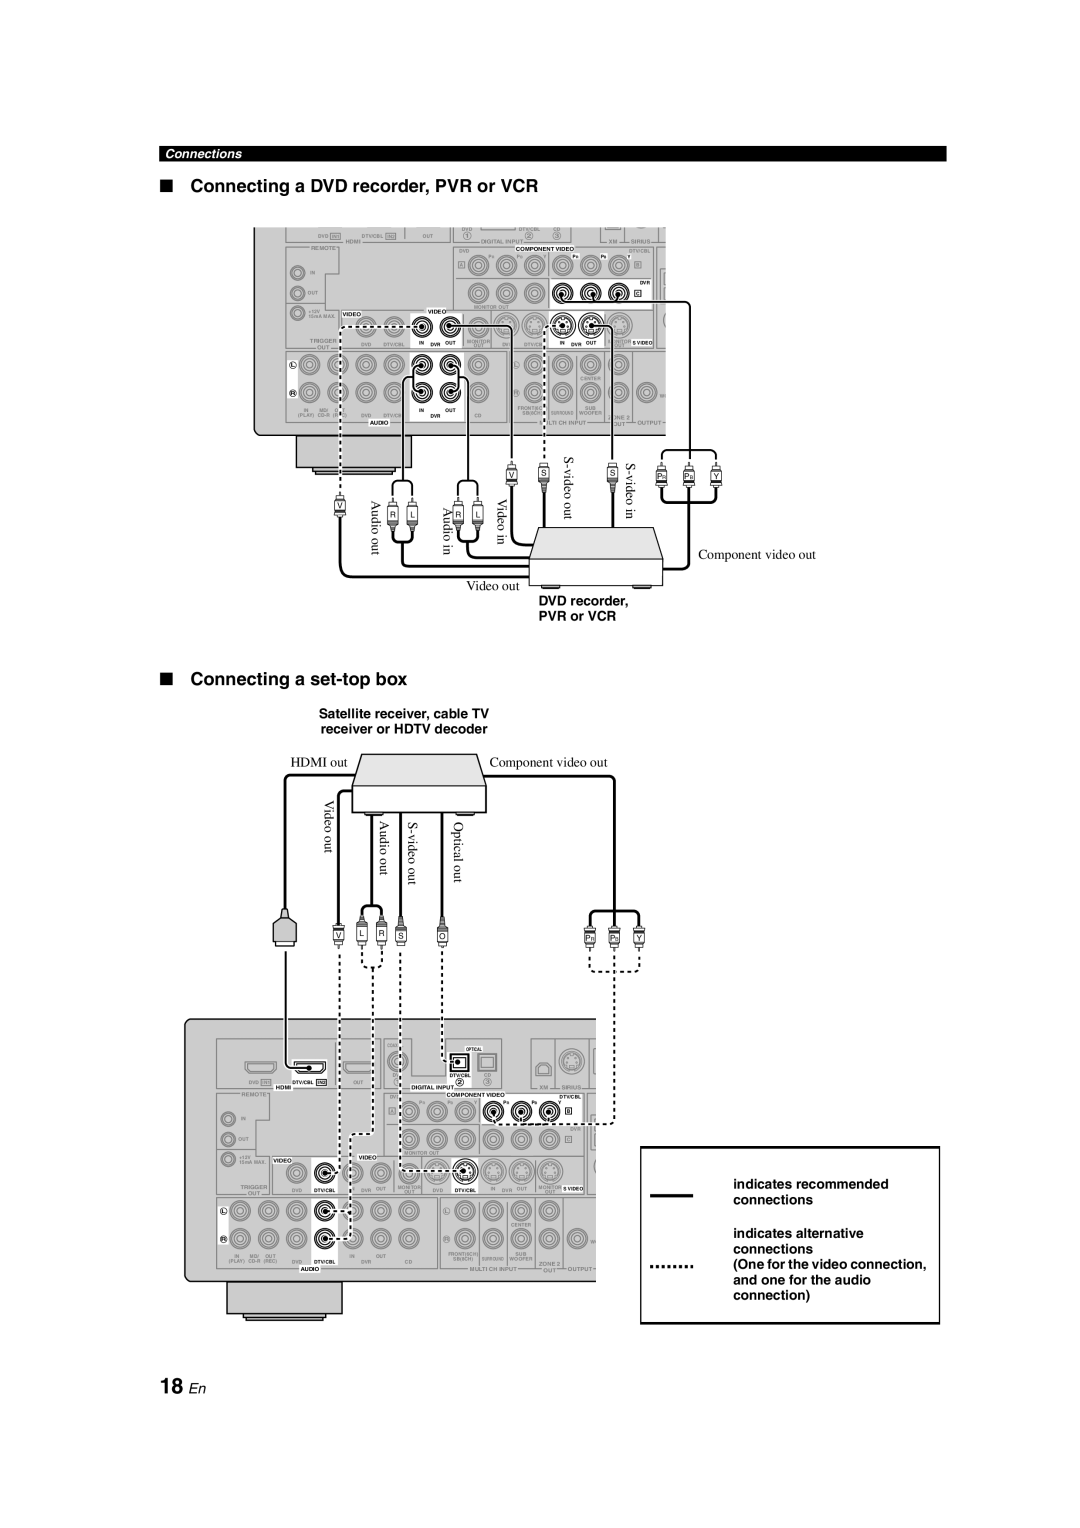 Yamaha RX-V563 owner manual 18 En, Connecting a DVD recorder, PVR or VCR, Connecting a set-top box, Connections 